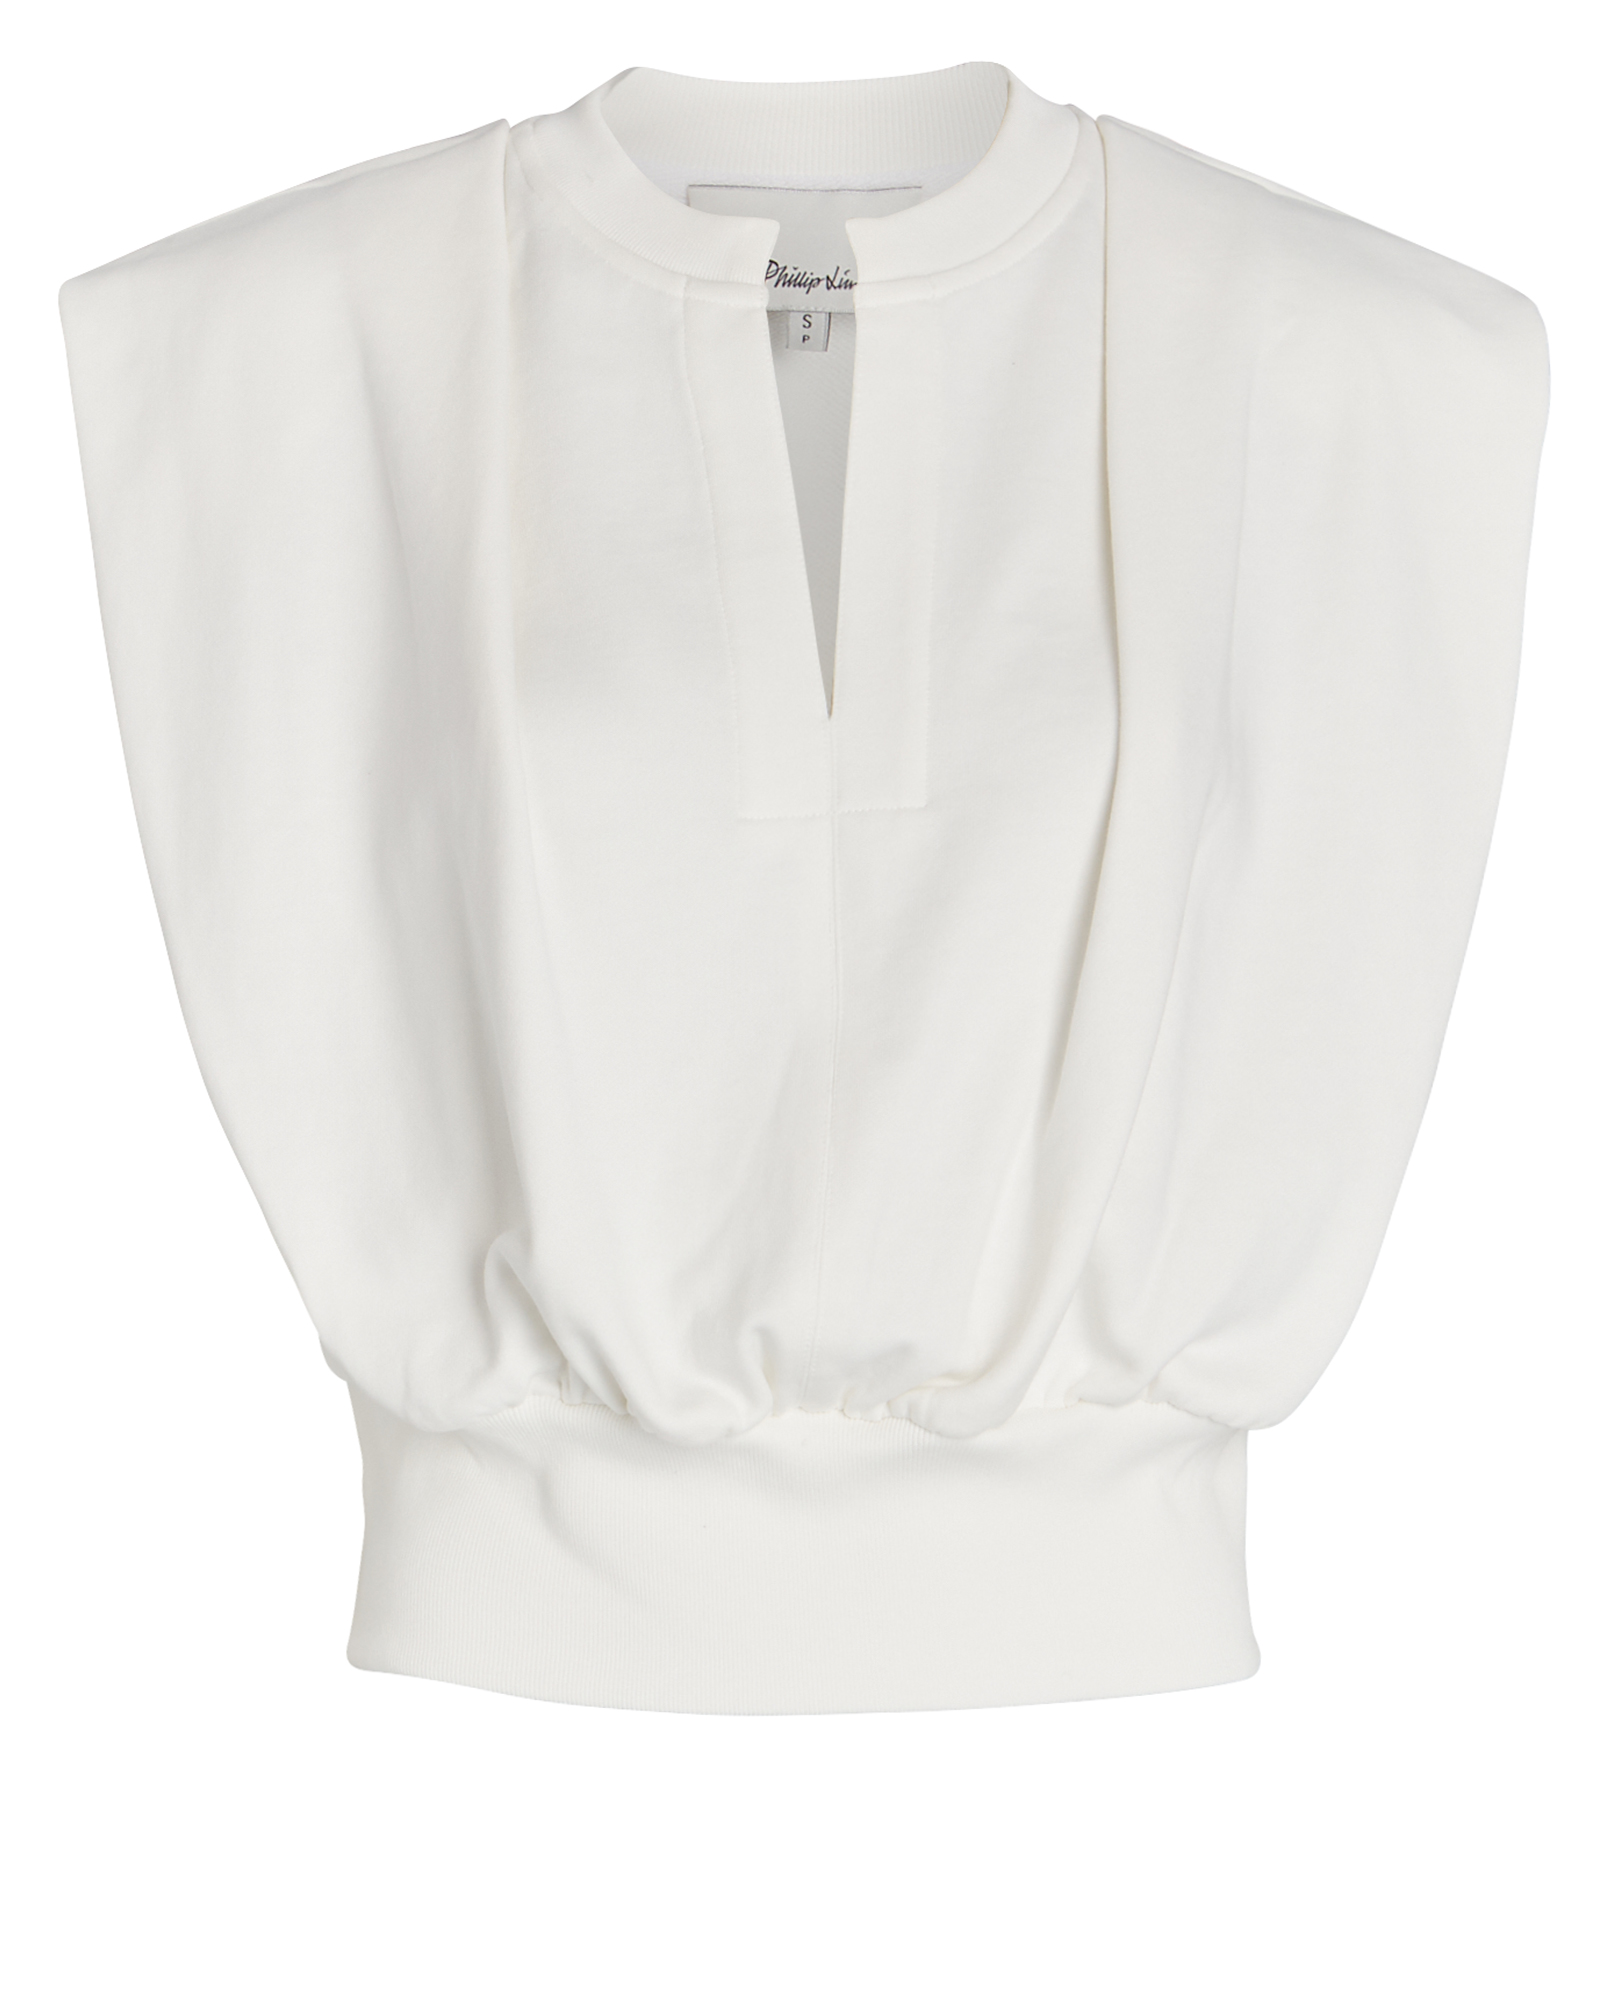 3.1 Phillip Lim Sleeveless French Terry Top | INTERMIX®